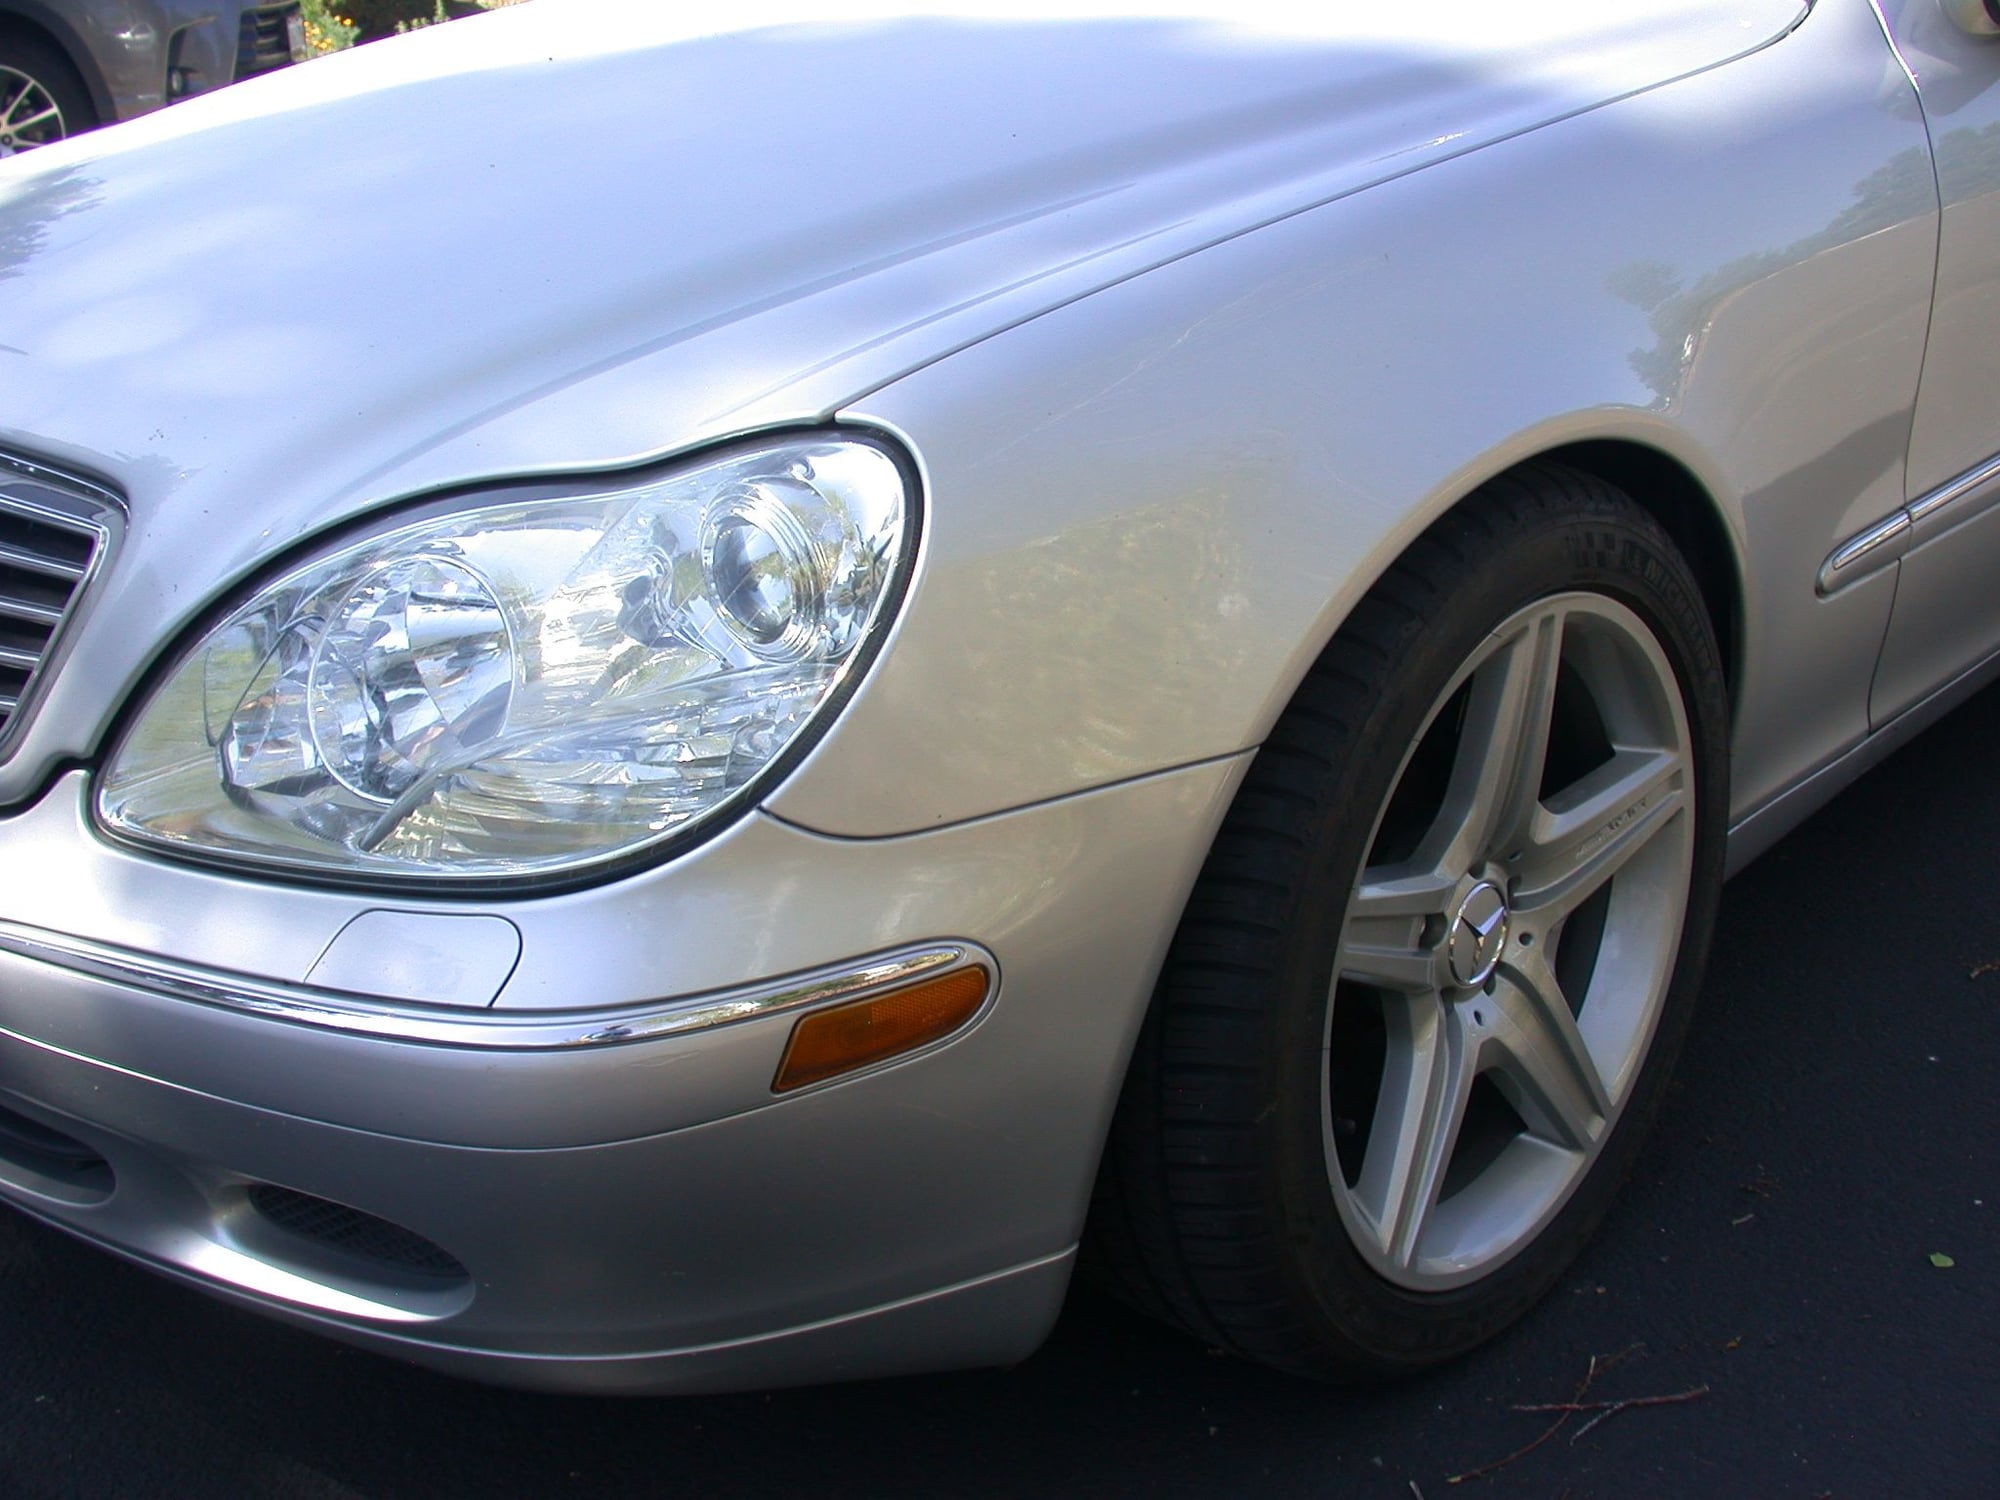 2001 Mercedes-Benz S500 - Clear title, no rust, excellent condition, non smoker,low milage - Used - VIN WDBNG75J31A21XXXX - 8 cyl - 2WD - Automatic - Sedan - Silver - Bend, OR 97701, United States